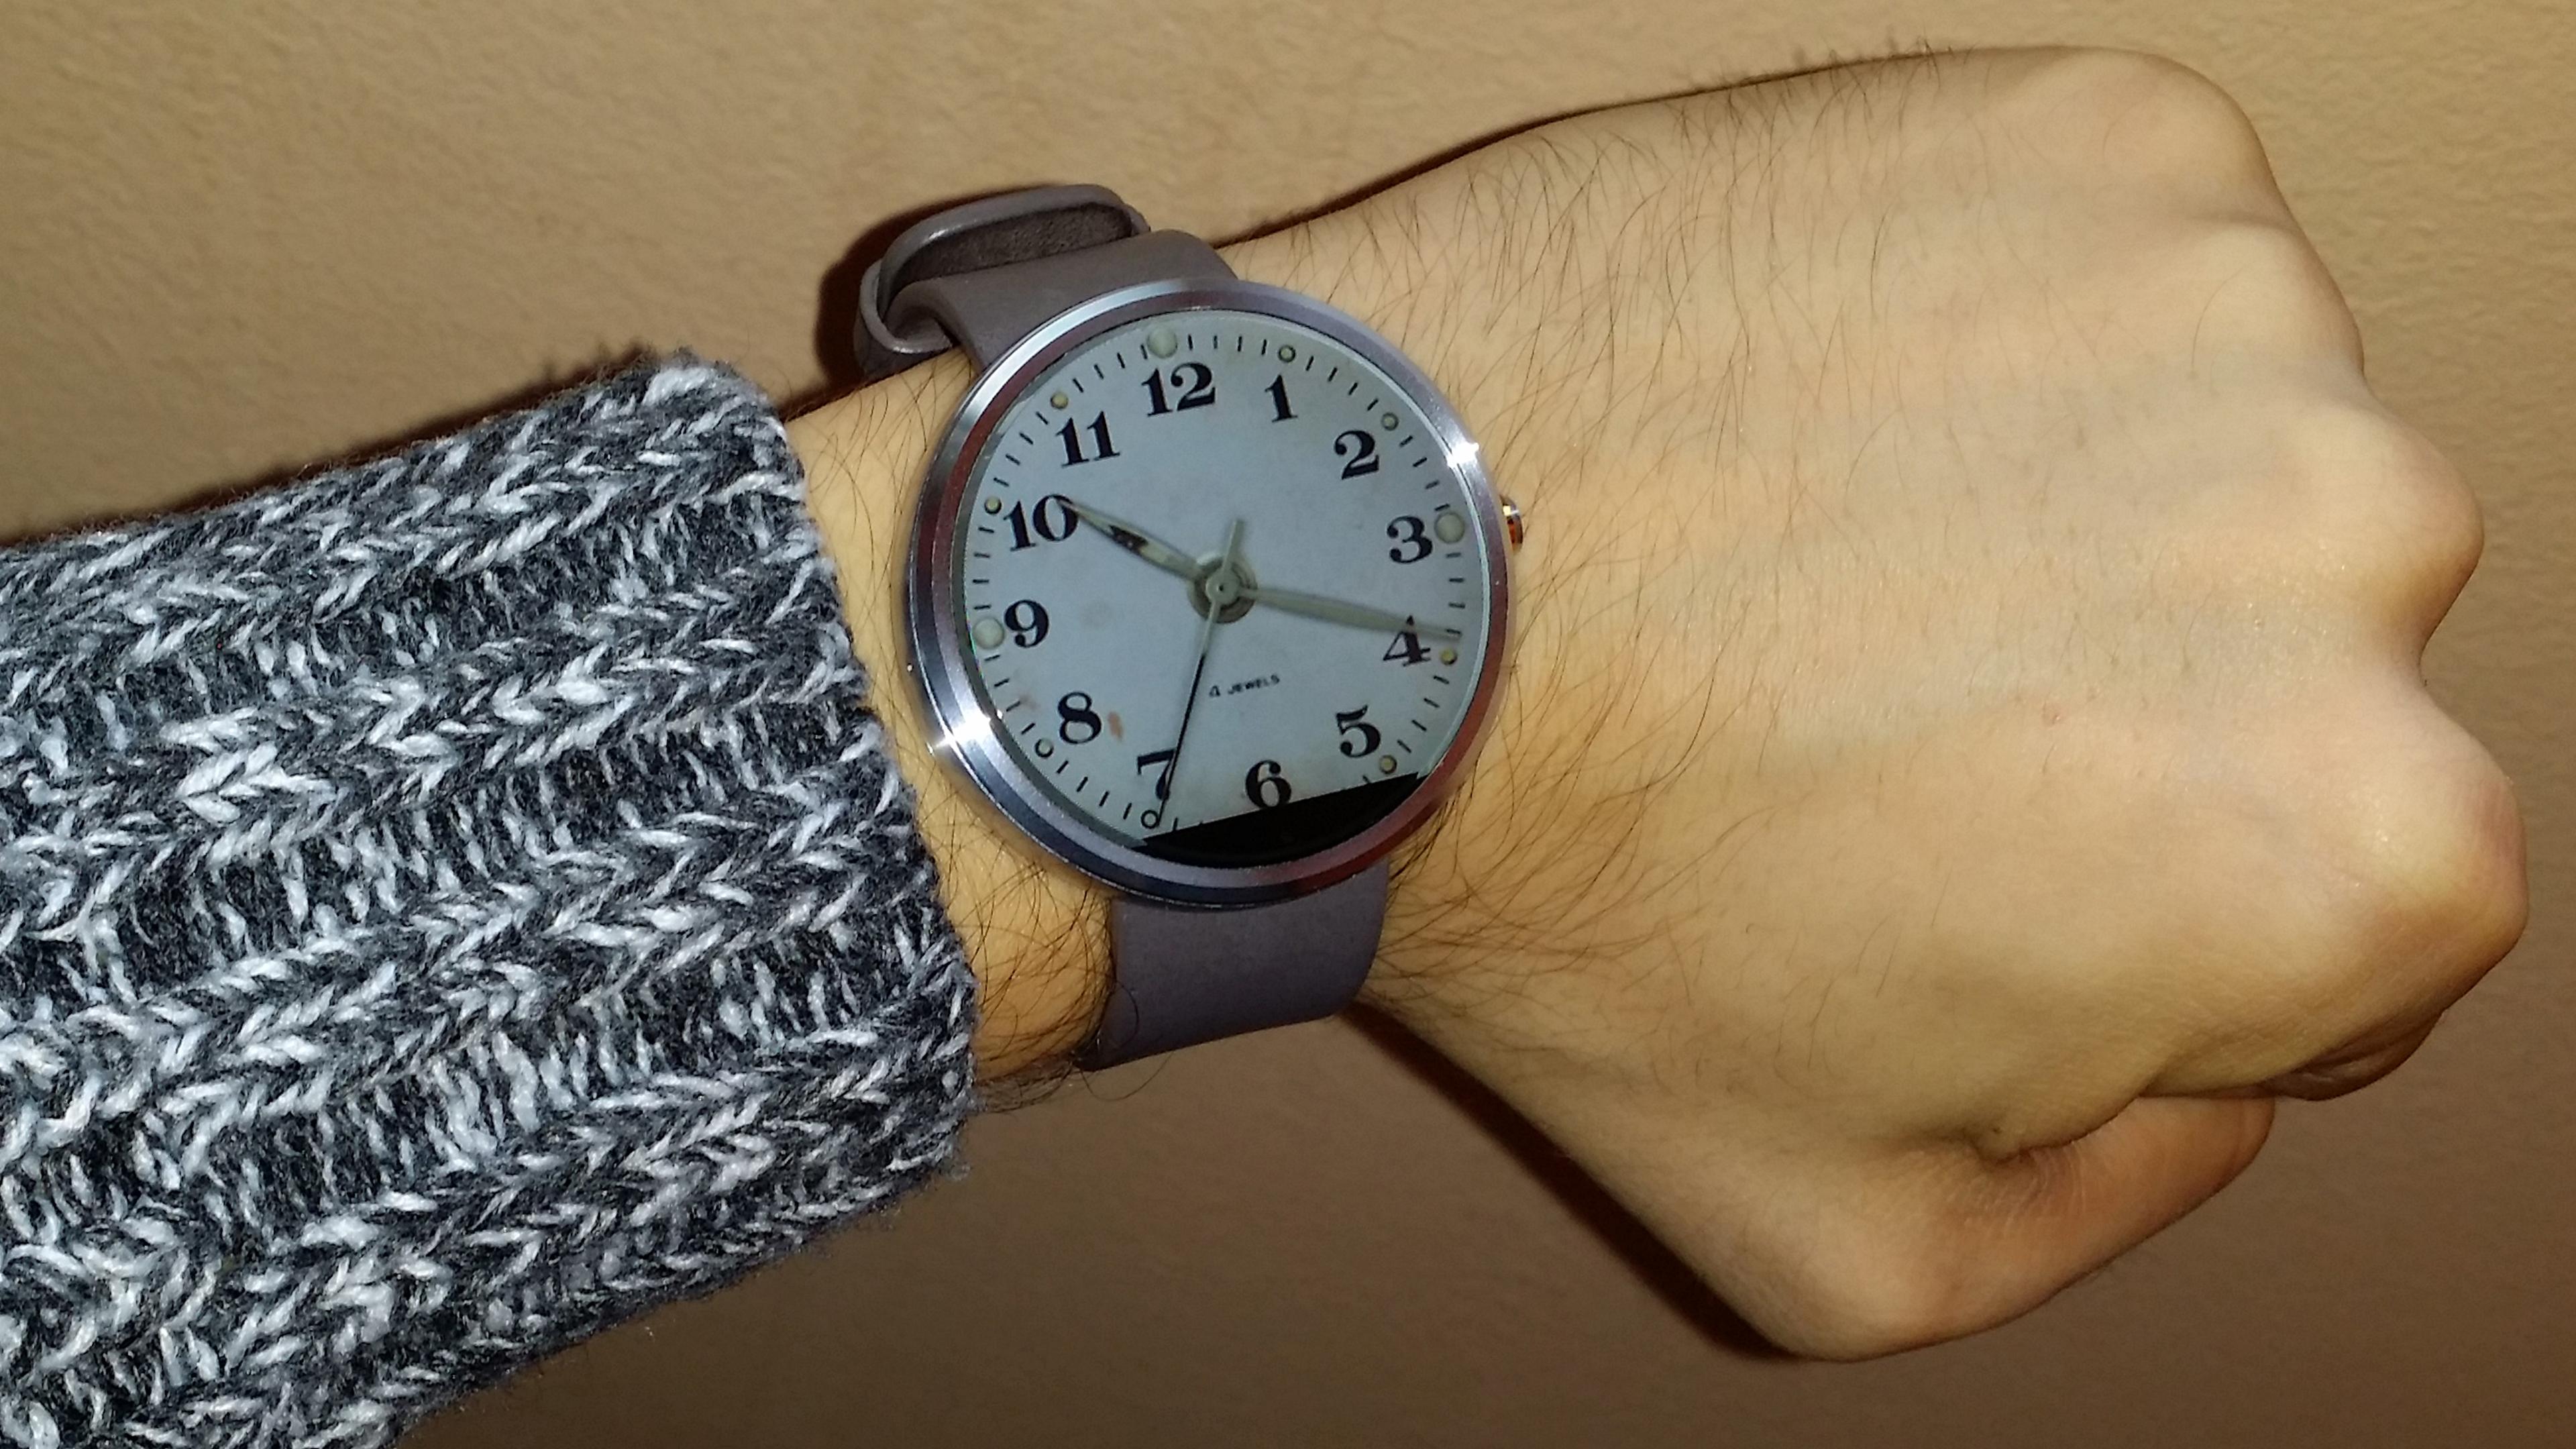 Android application Wear Face: Classic (Round) screenshort